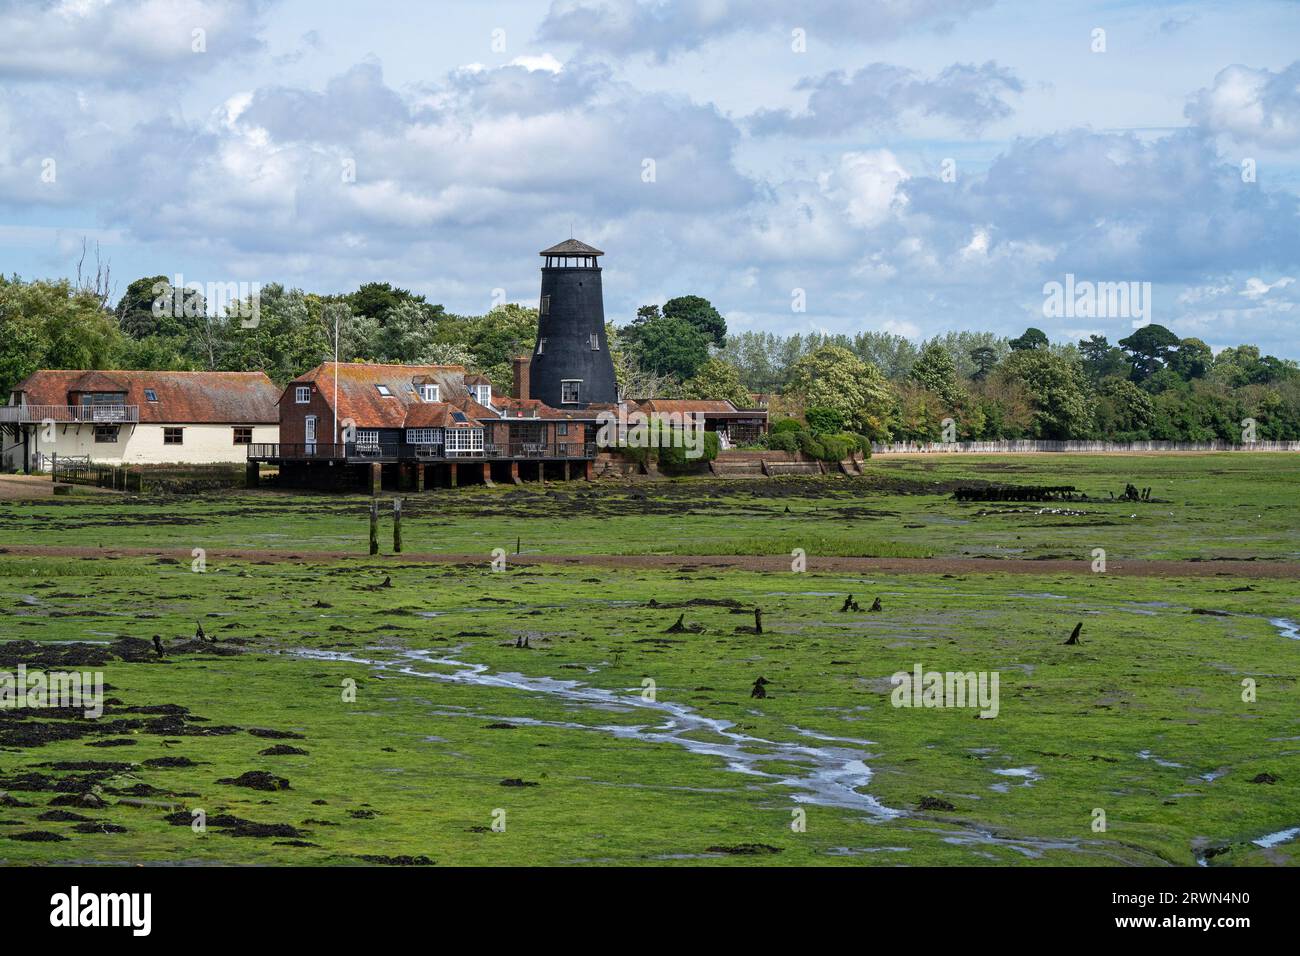 The Old Mill at Langstone Quay, Chichester Harbour on the Solent, Hampshire, England, UK Stock Photo